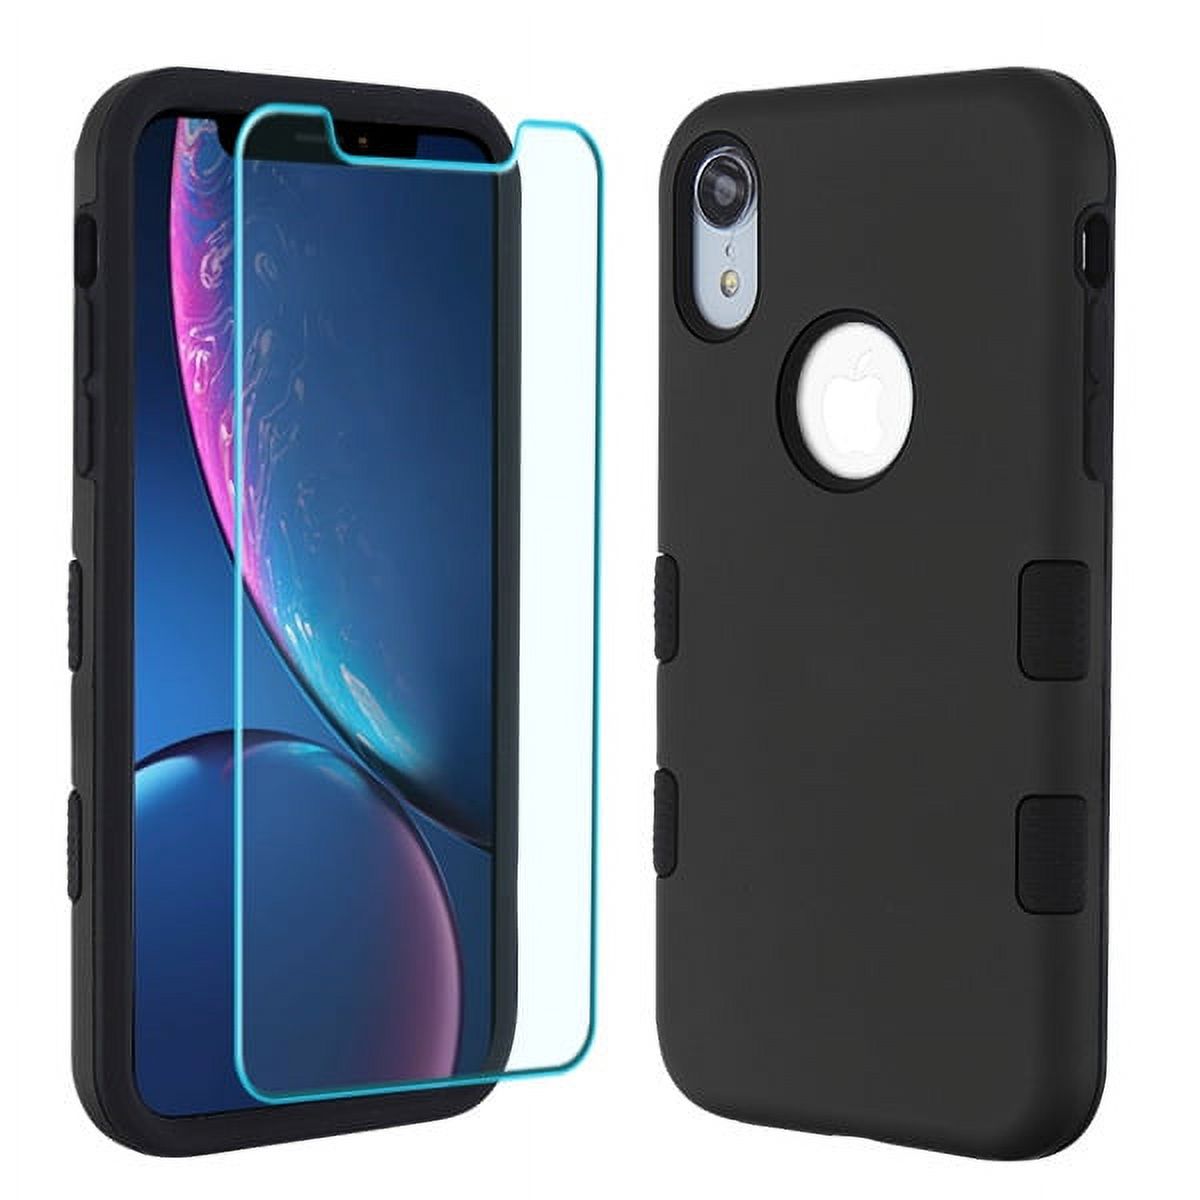 Apple iPhone XR (6.1 inch) Phone Case & Screen Protector [2 in 1 Bundle Package] Tempered Glass + BLACK Hybrid Shockproof Bumper Rugged Slim Fit Protective Cover for Apple iPhone Xr (6.1") - image 1 of 6